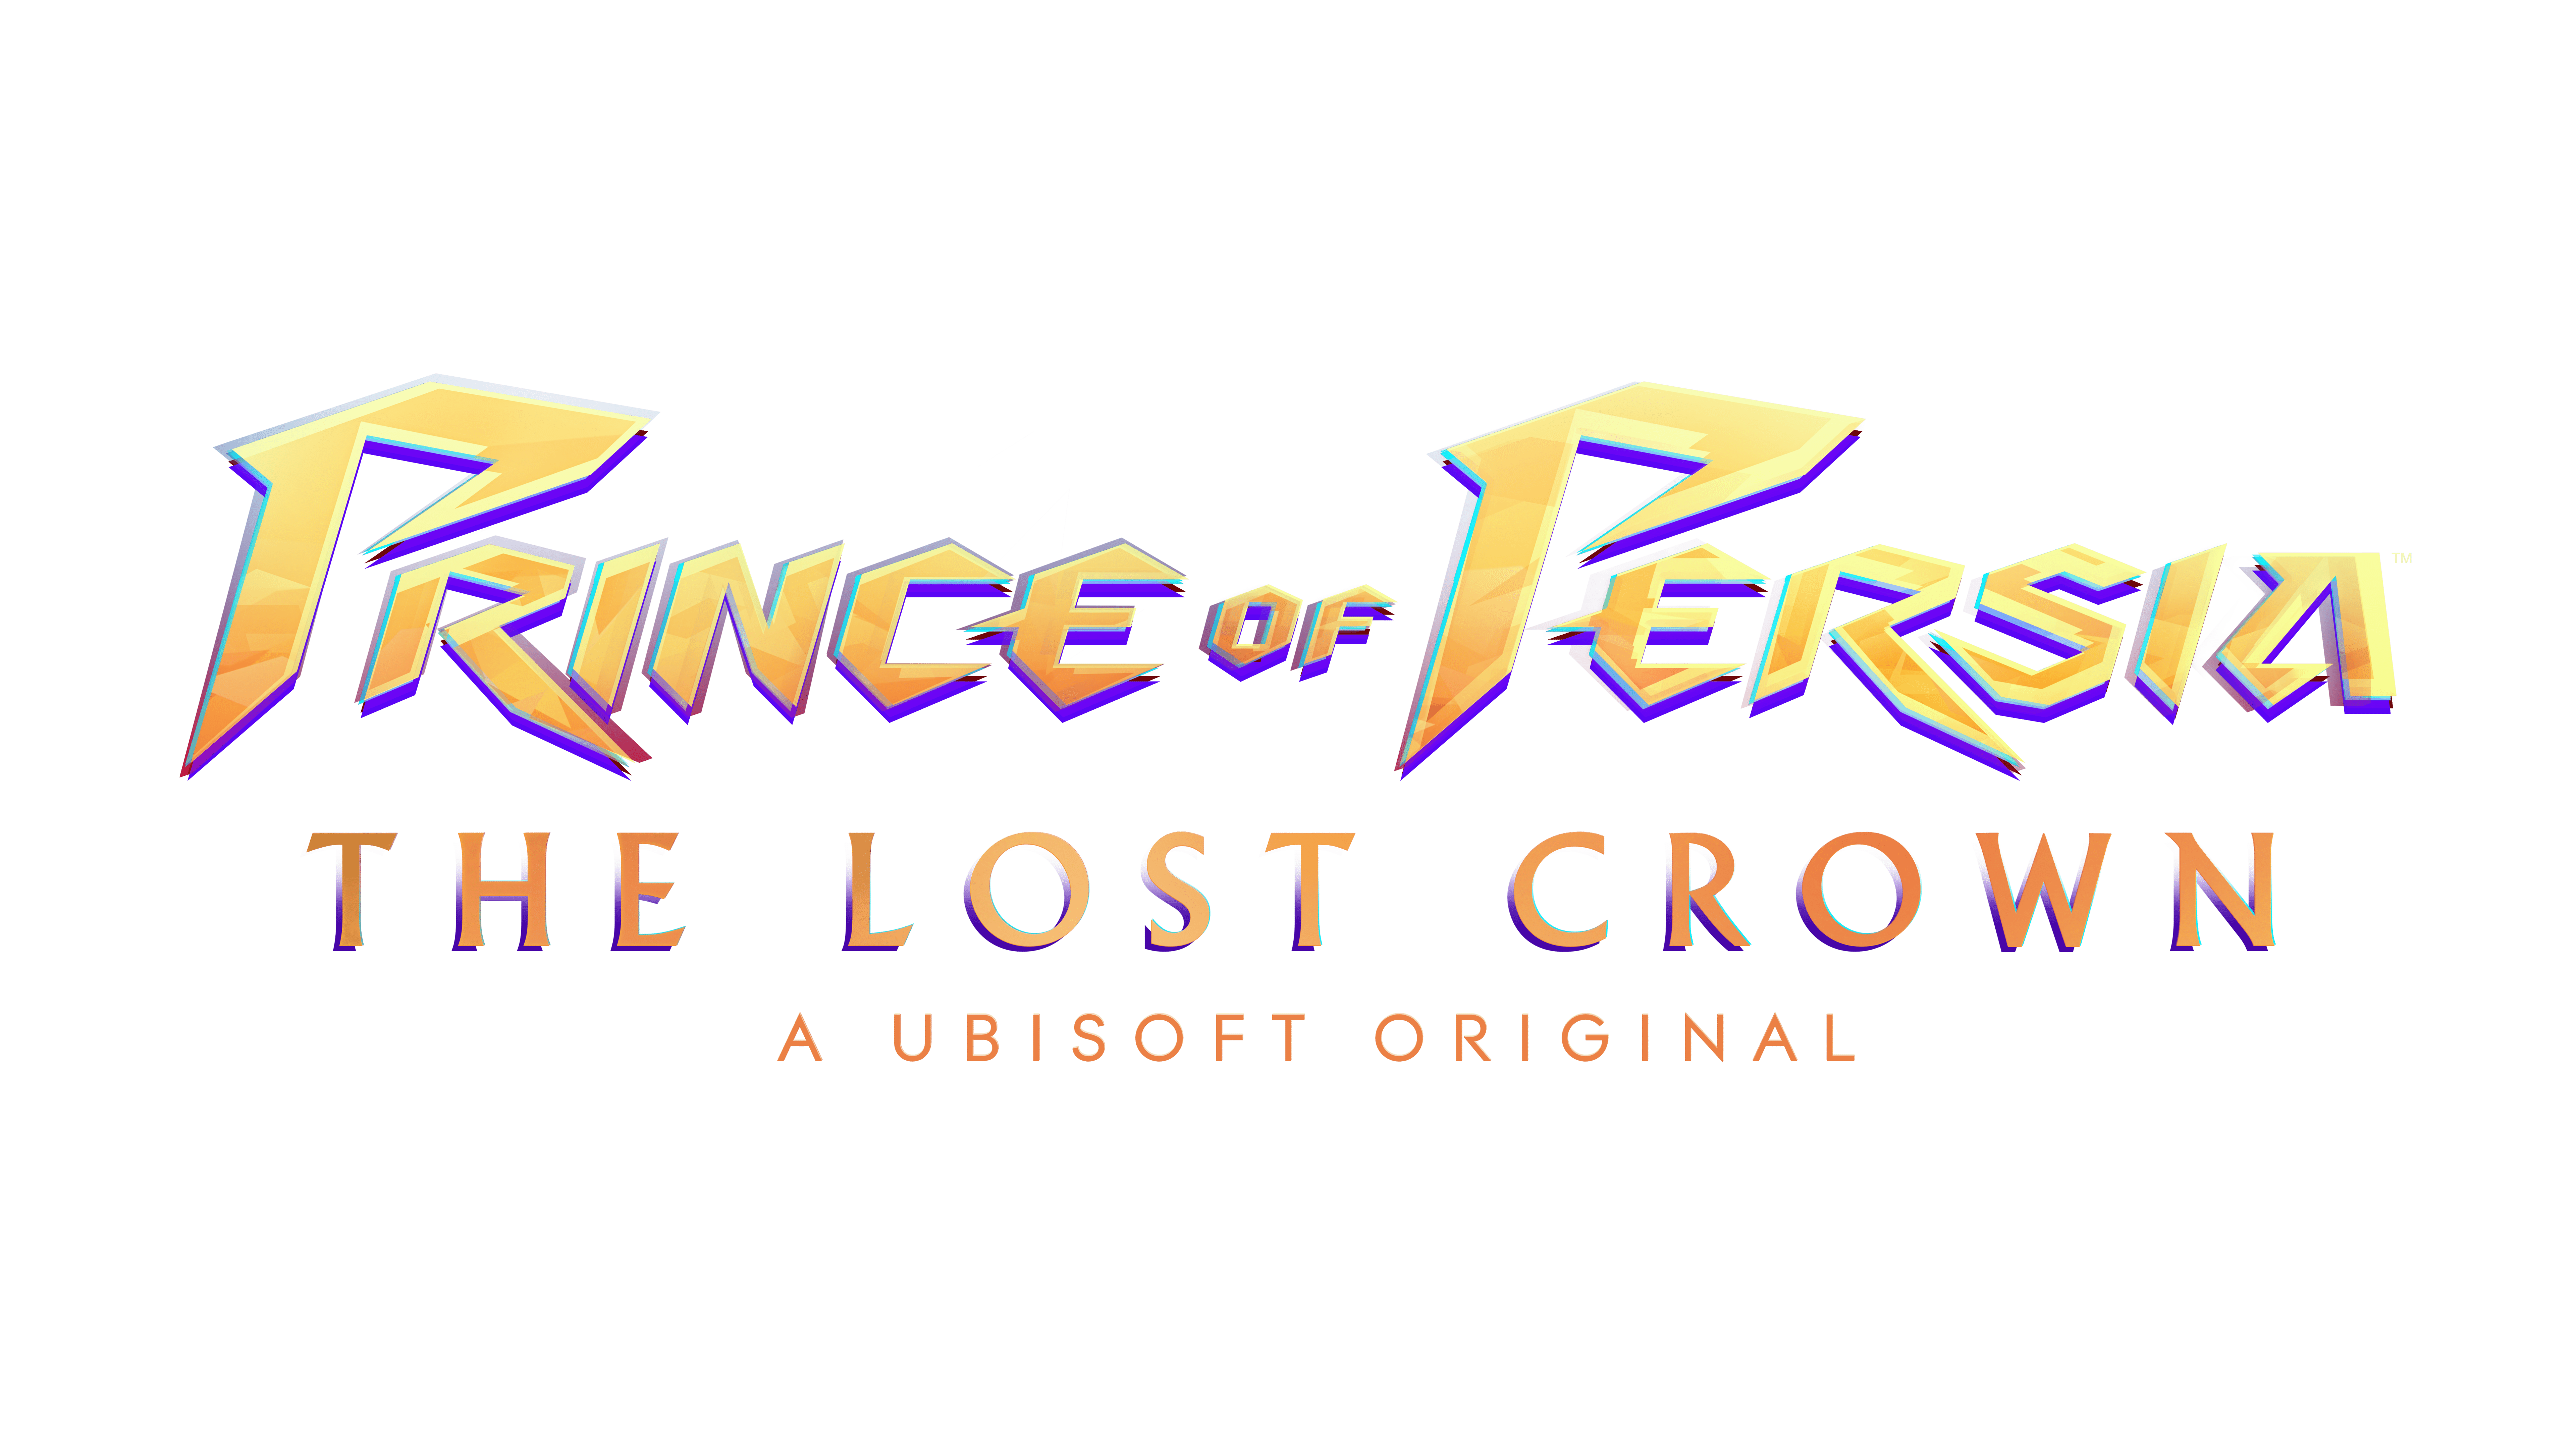 Prince of Persia: The Lost Crown Announced